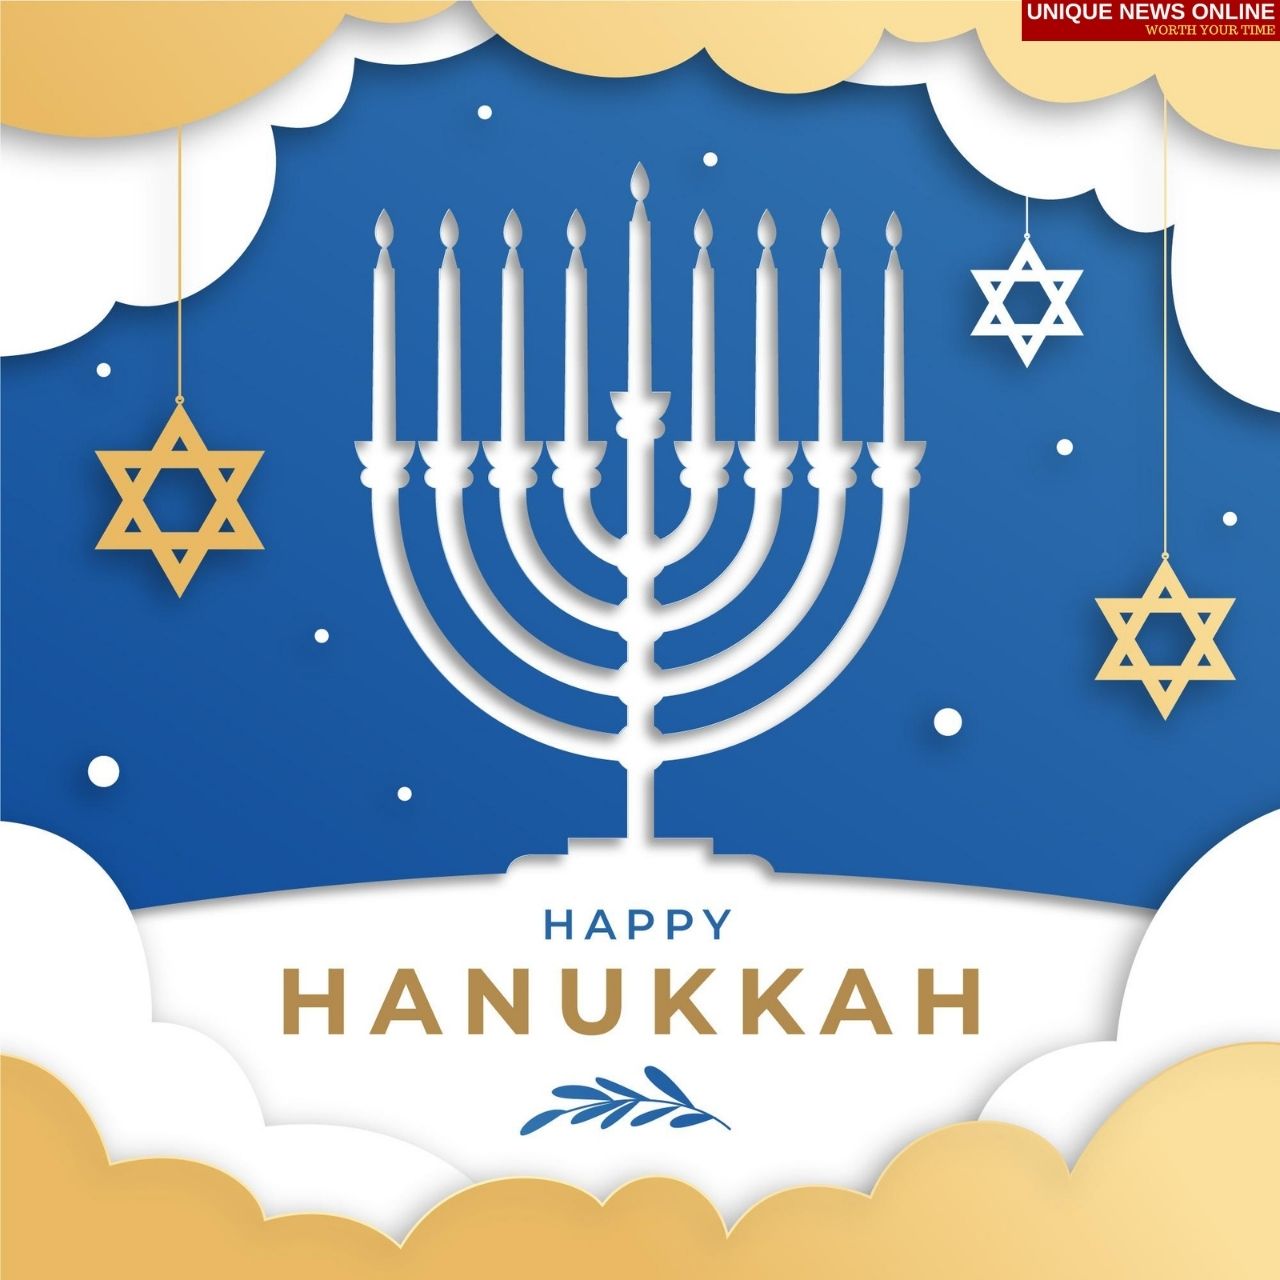 Hanukkah 2021 Wishes, Quotes, Sayings, Messages, Greetings, and HD Images to greet your Best Friend and Family Members